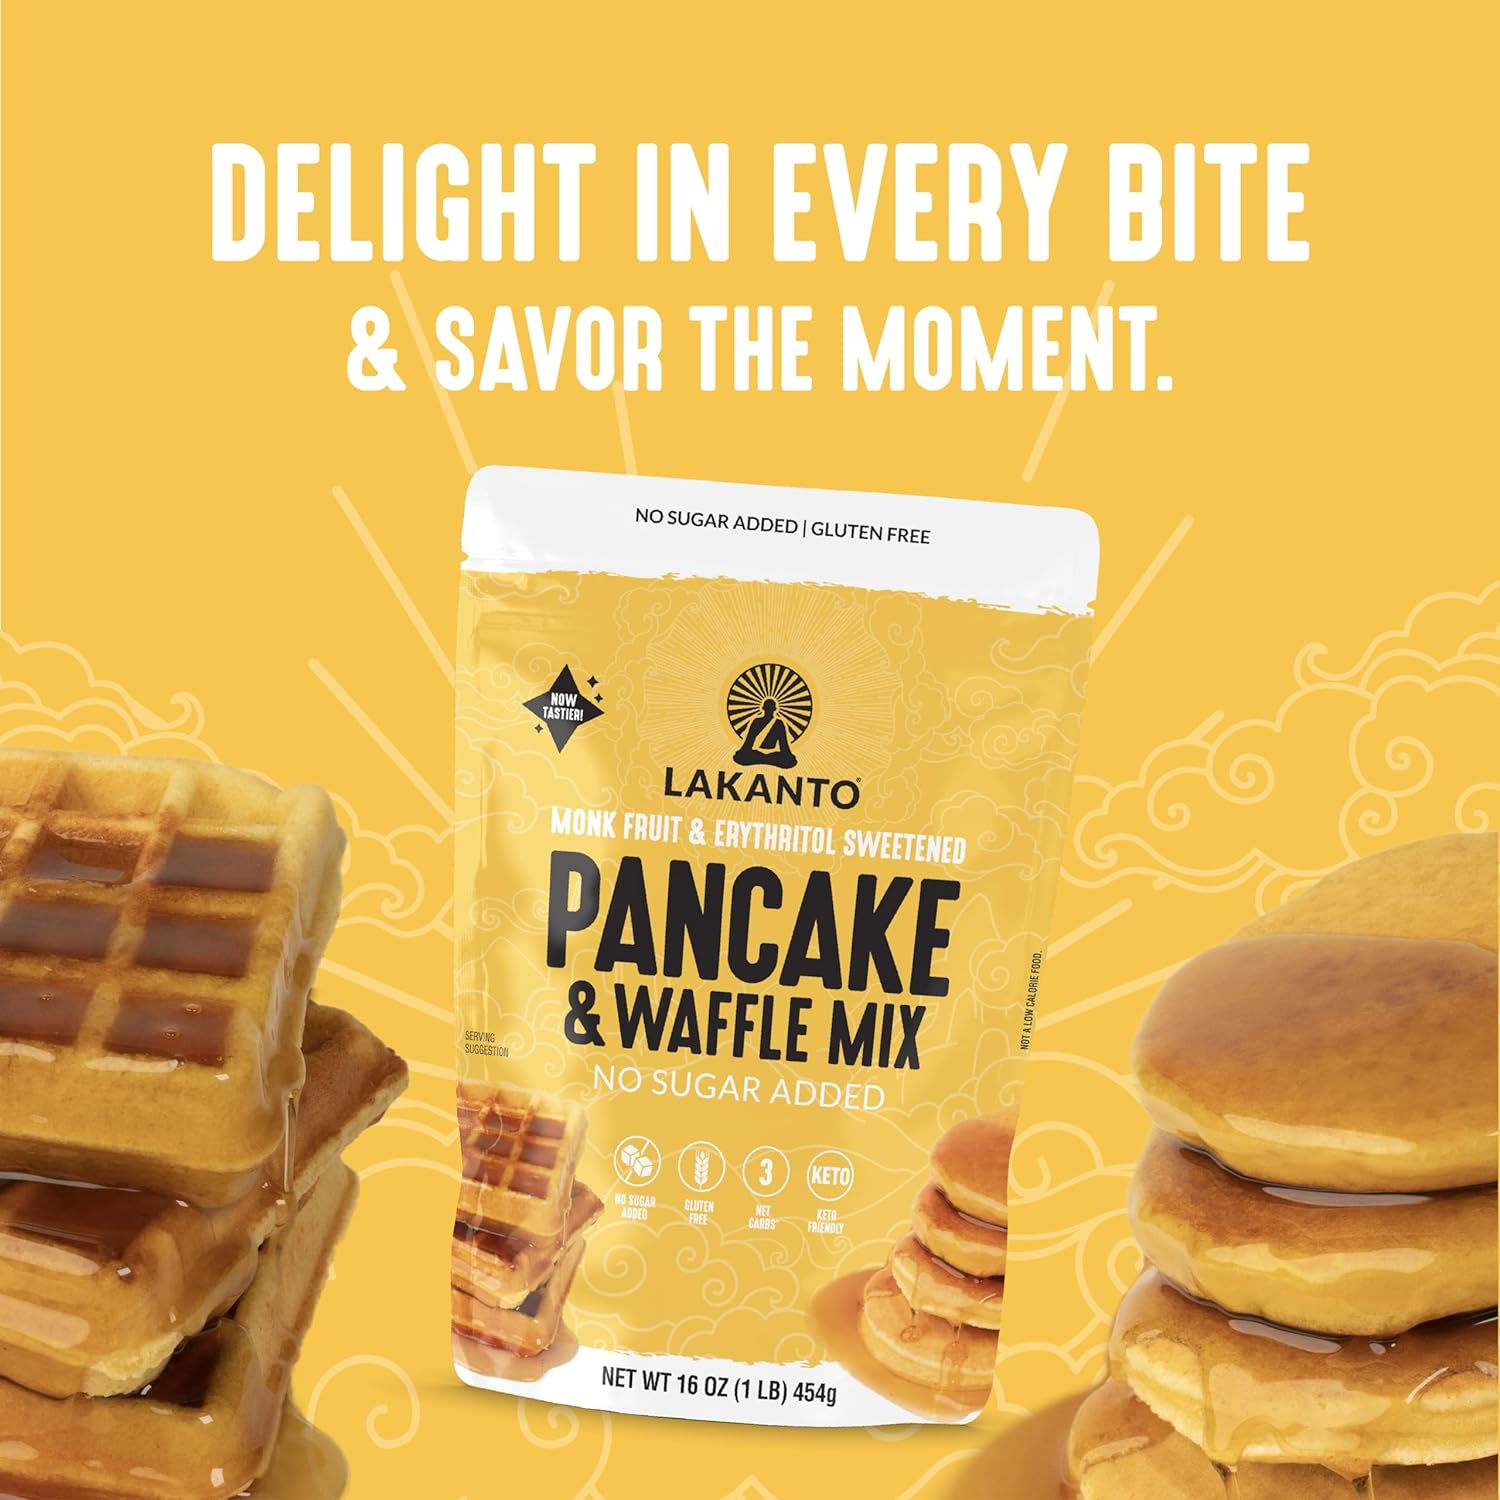 Lakanto Pancake and Waffle Mix (Reformulated) - Sweetened with Monk Fruit Sweetener and Erythritol, Breakfast, No Added Sugar, Gluten Free, Keto Diet Friendly - 16 oz